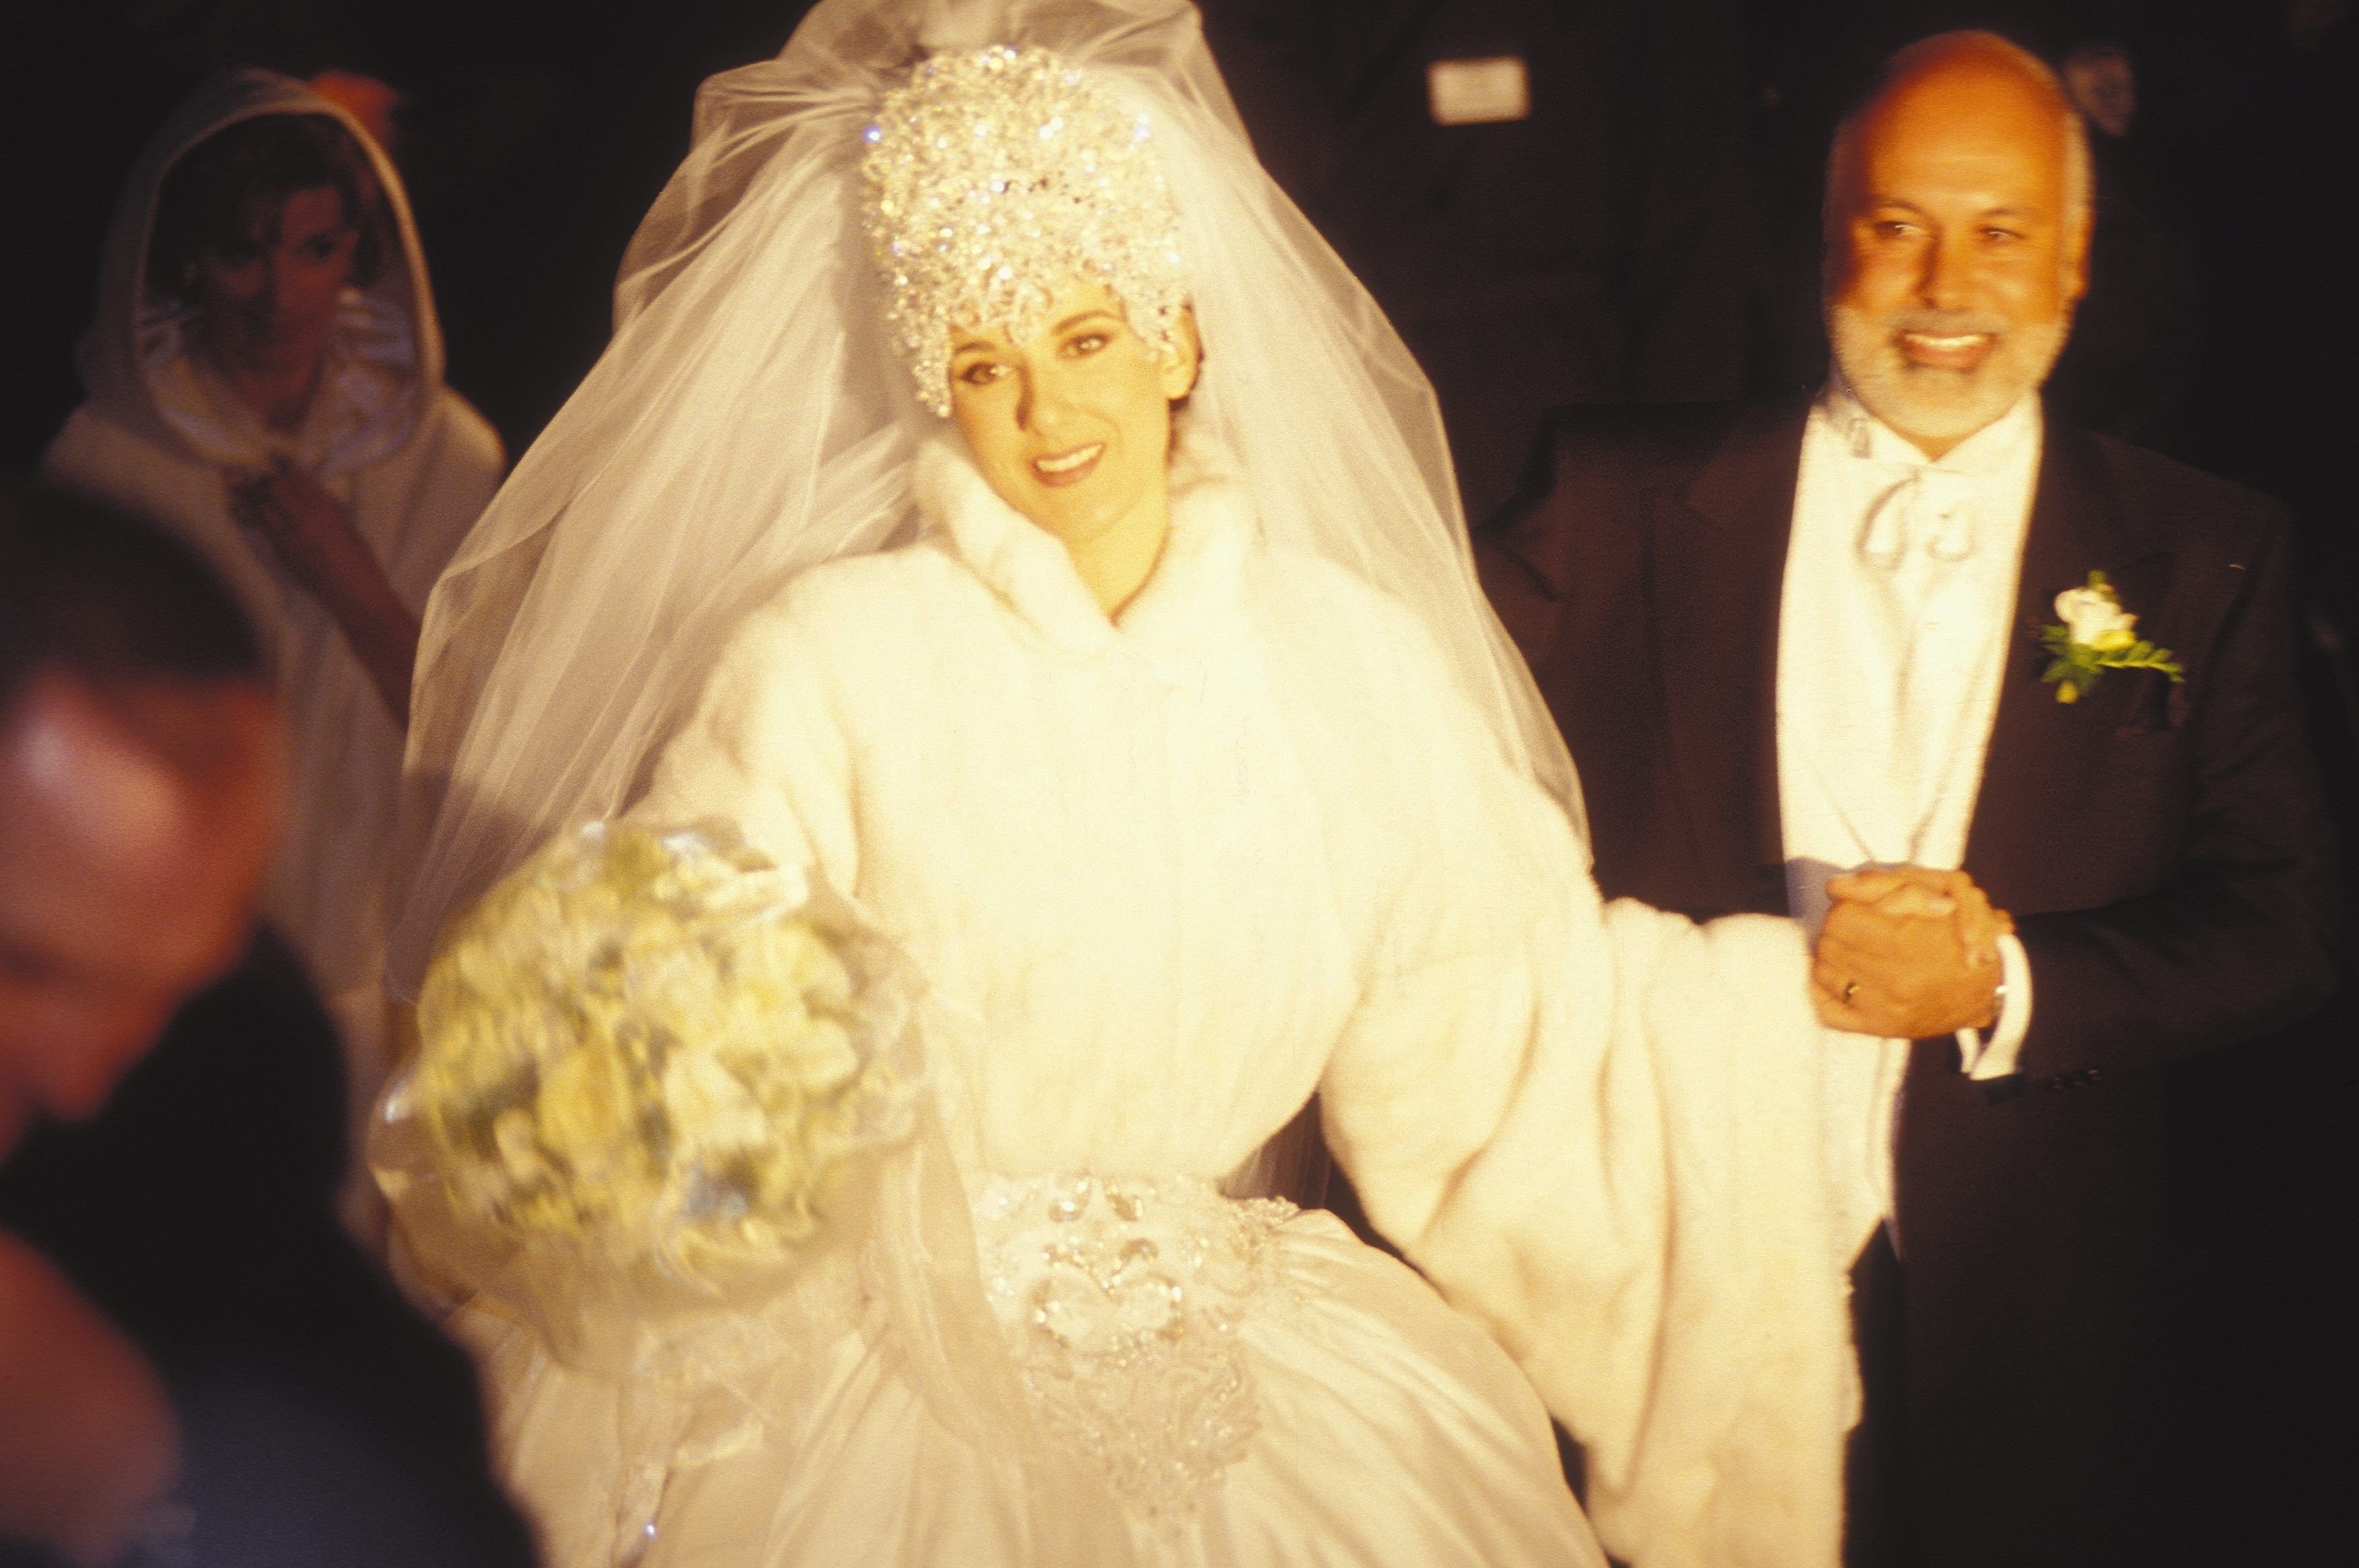 Celine Dion's wedding in Montreal, Canada on December 15, 1994 | Source: Getty Images